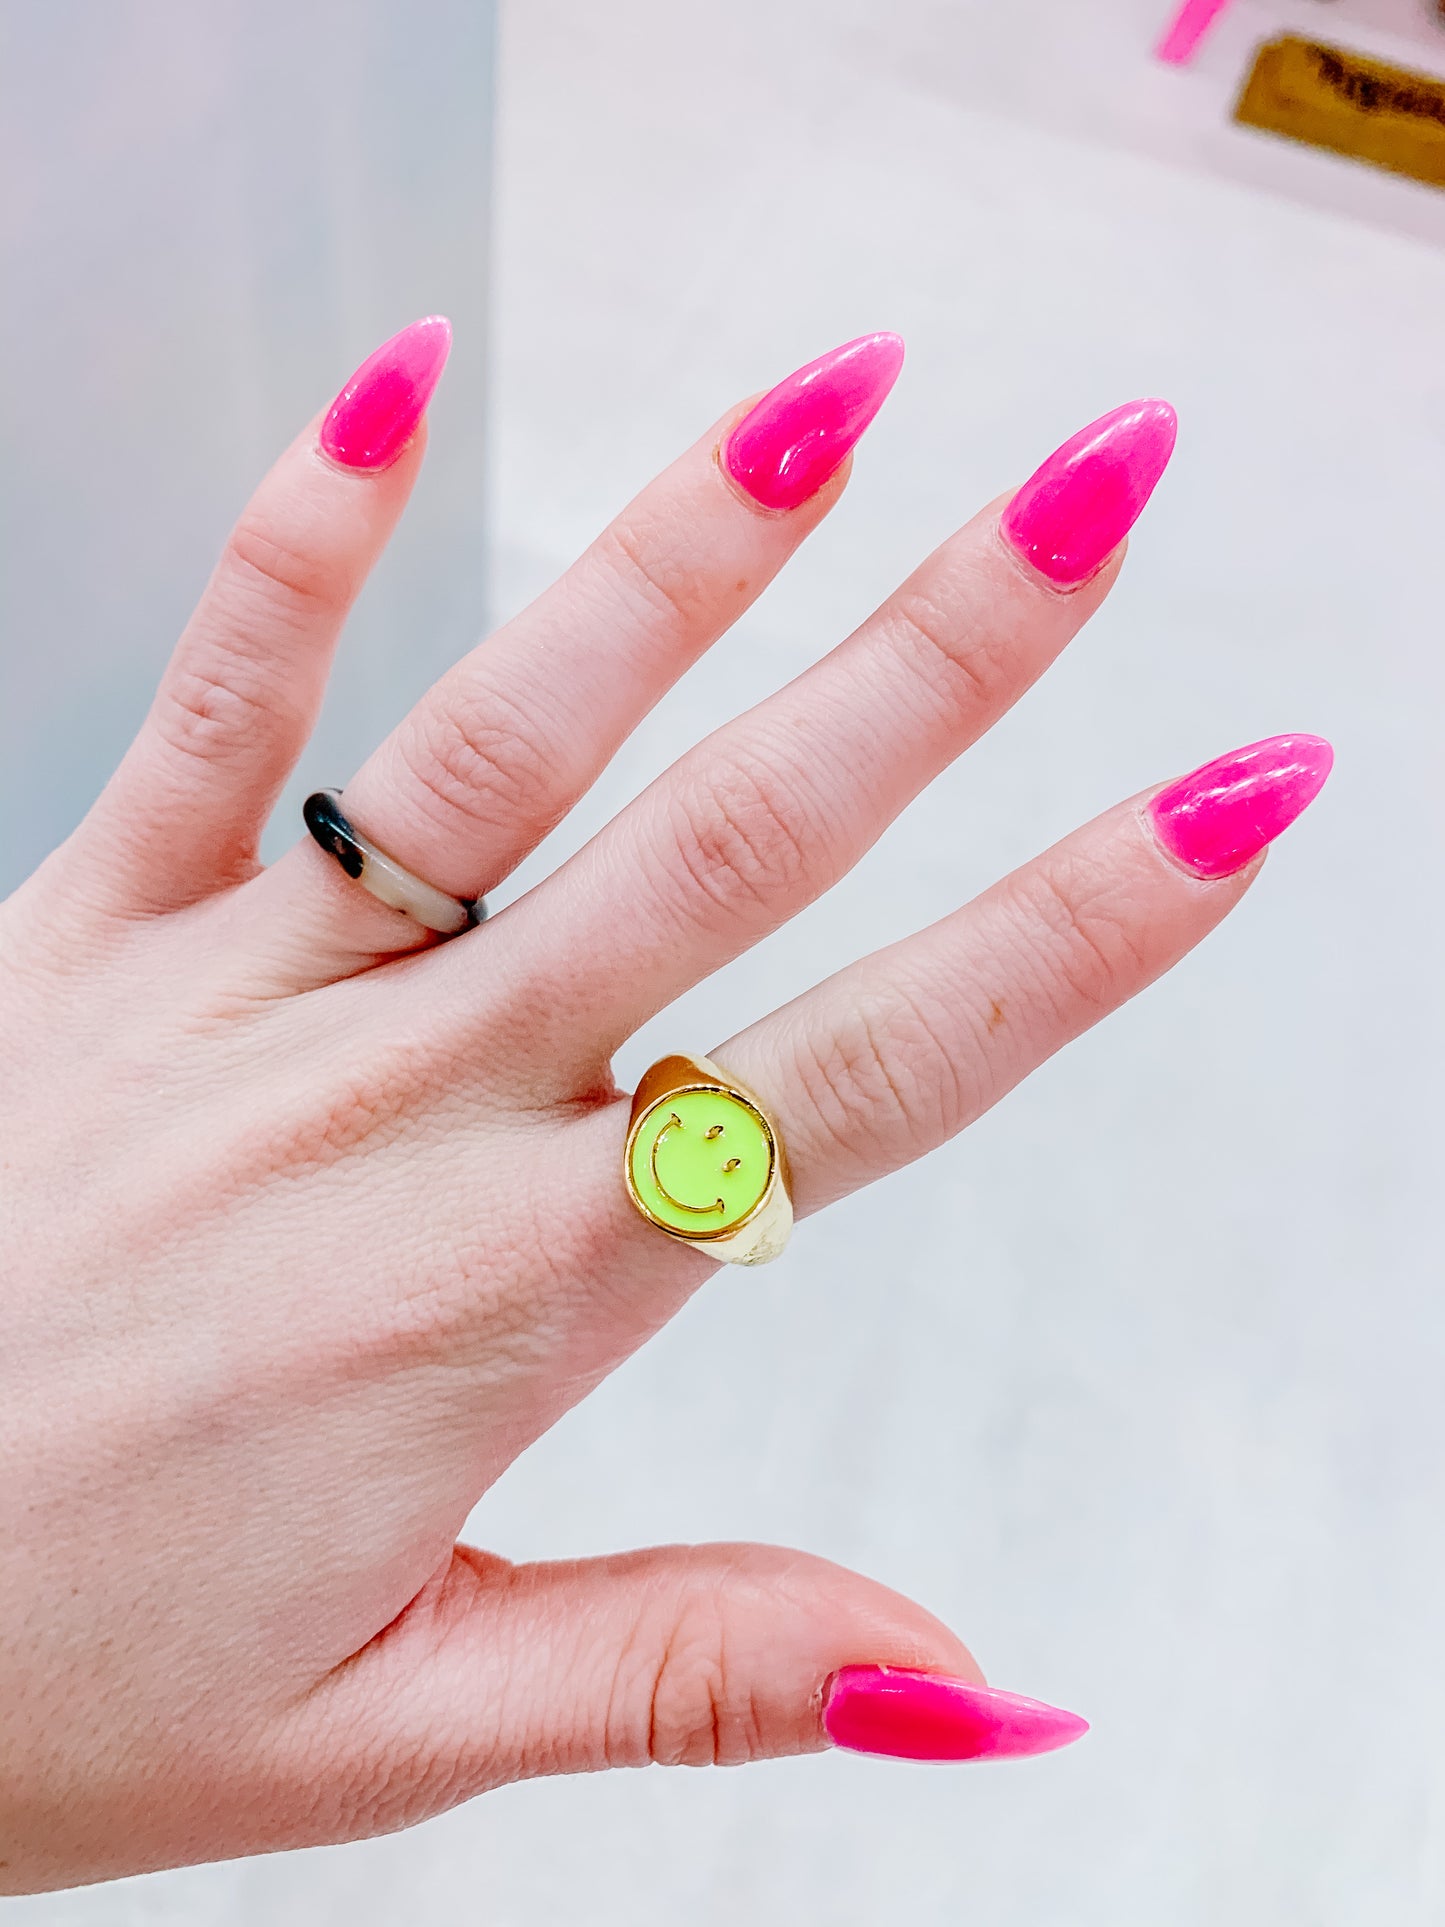 Neon yellow smiley face signet ring.